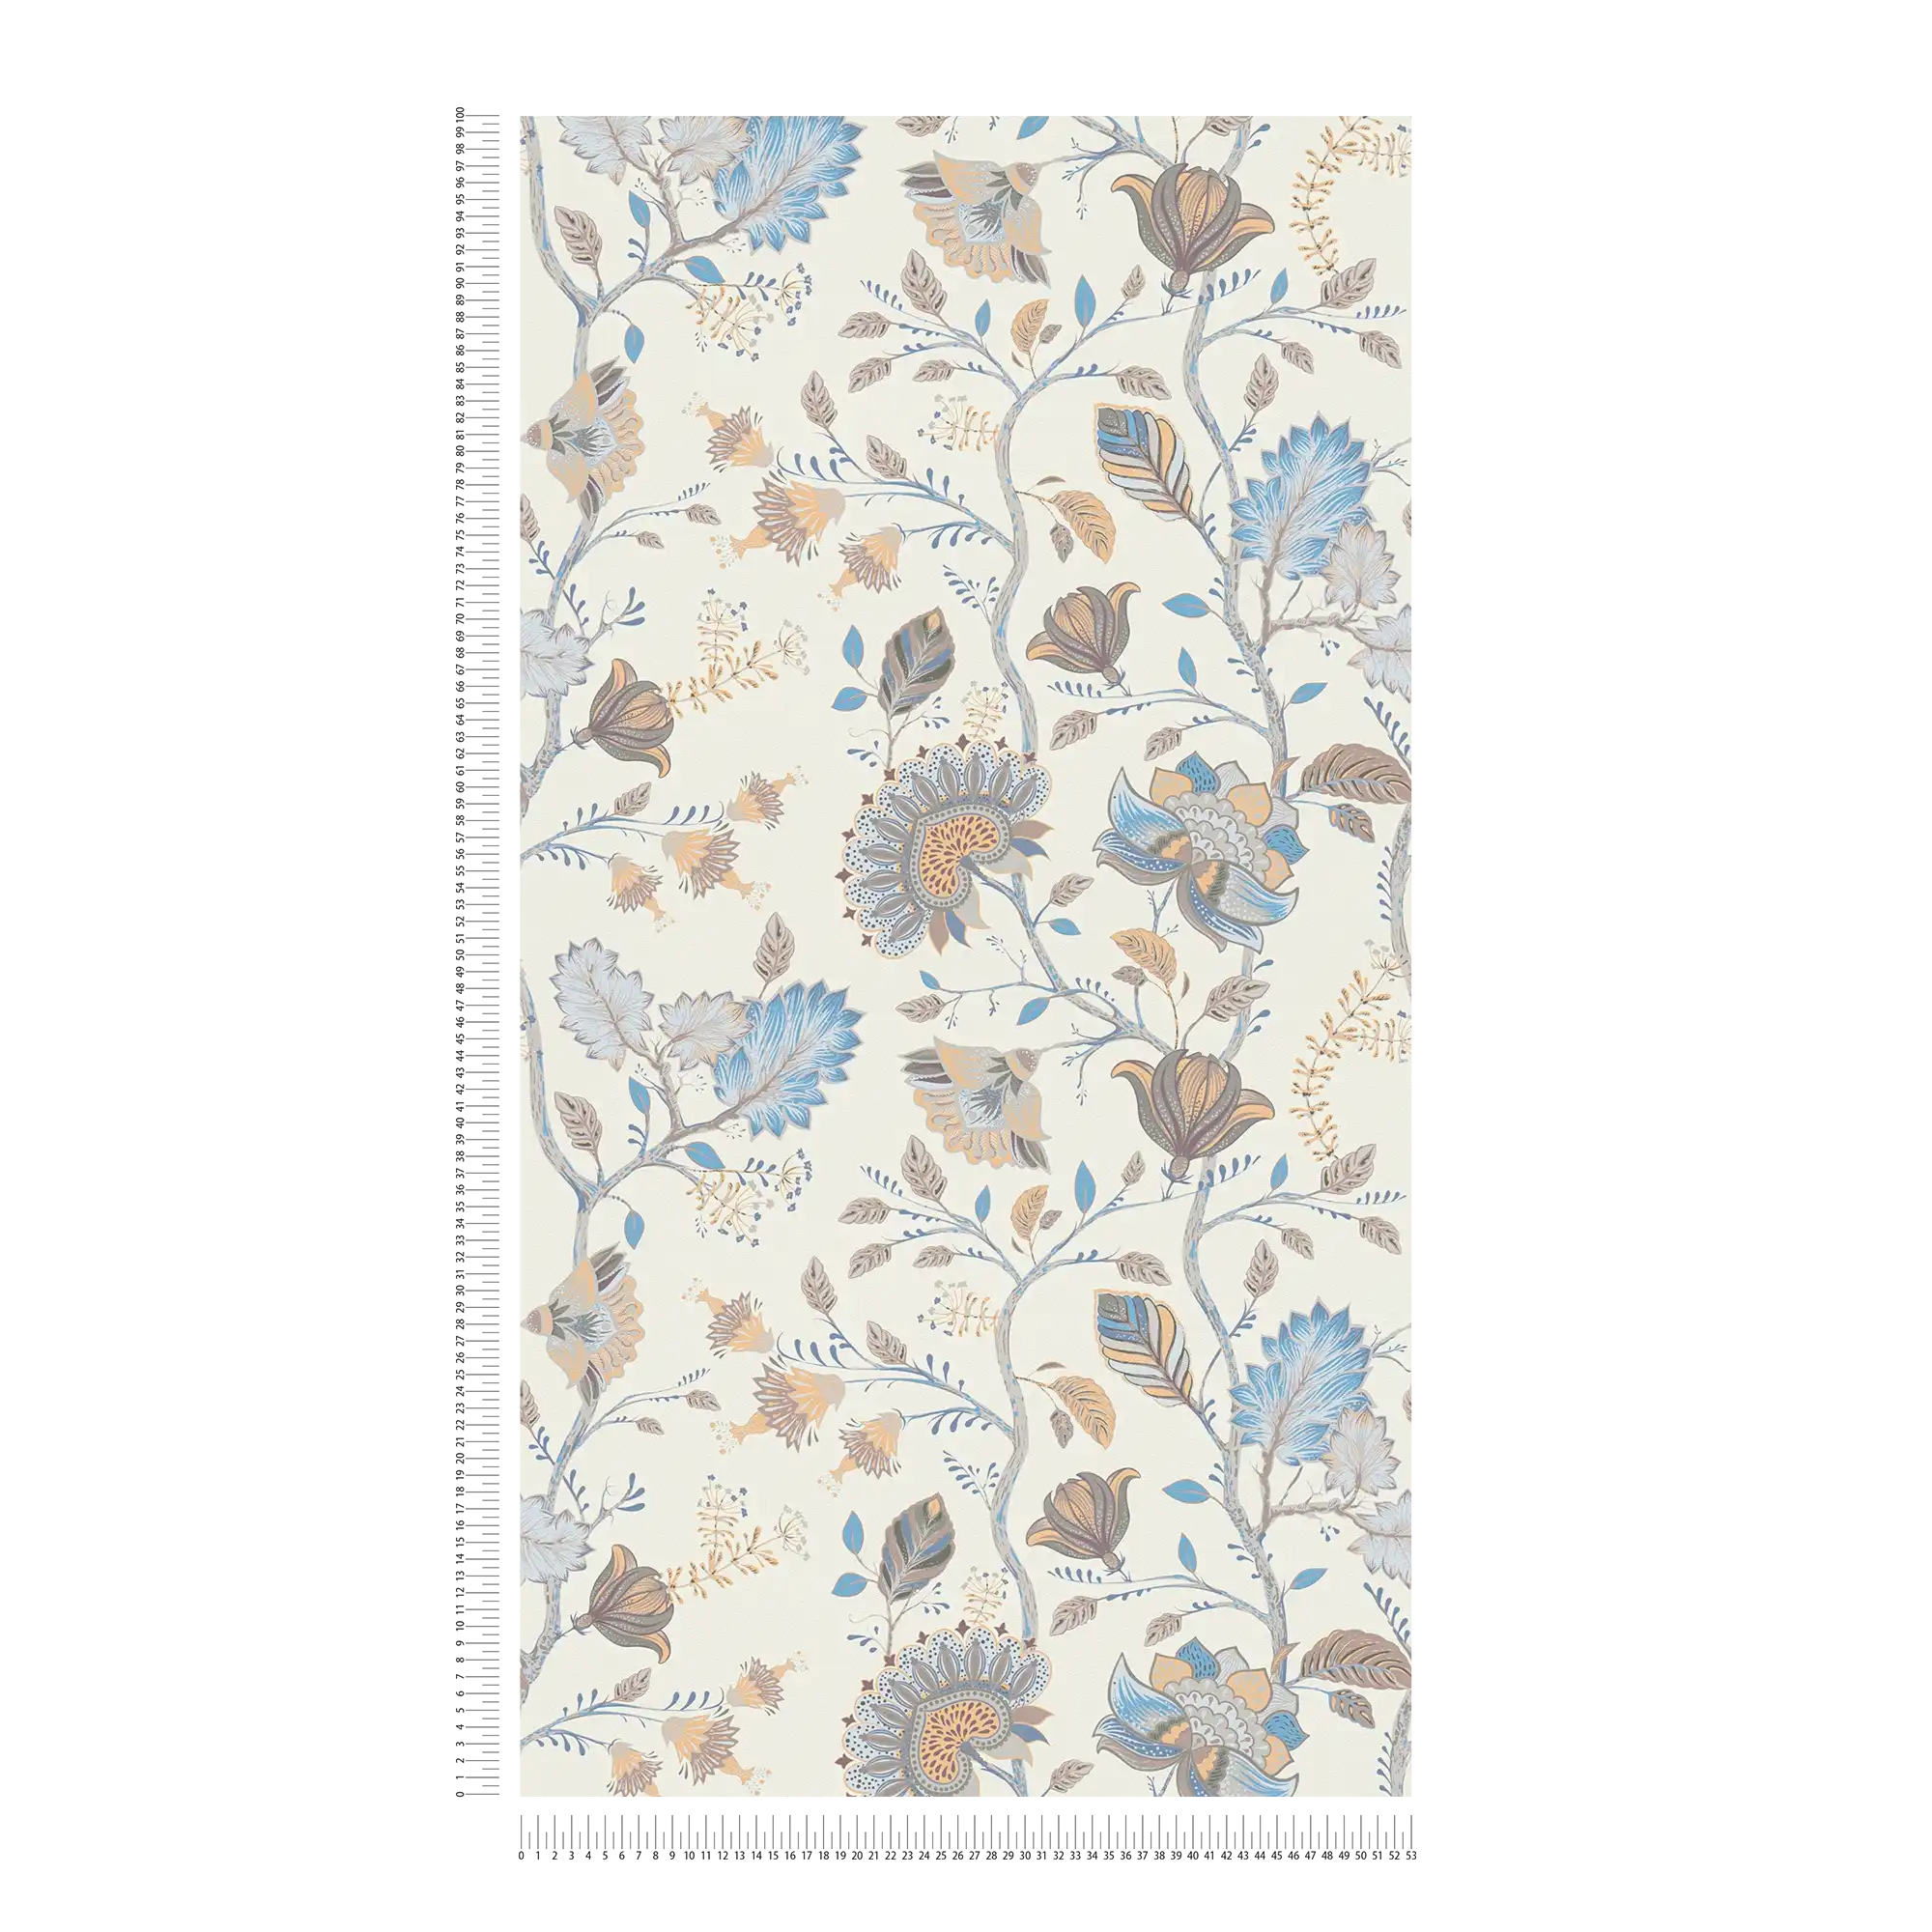             Non-woven wallpaper with floral pattern - blue, cream, grey
        